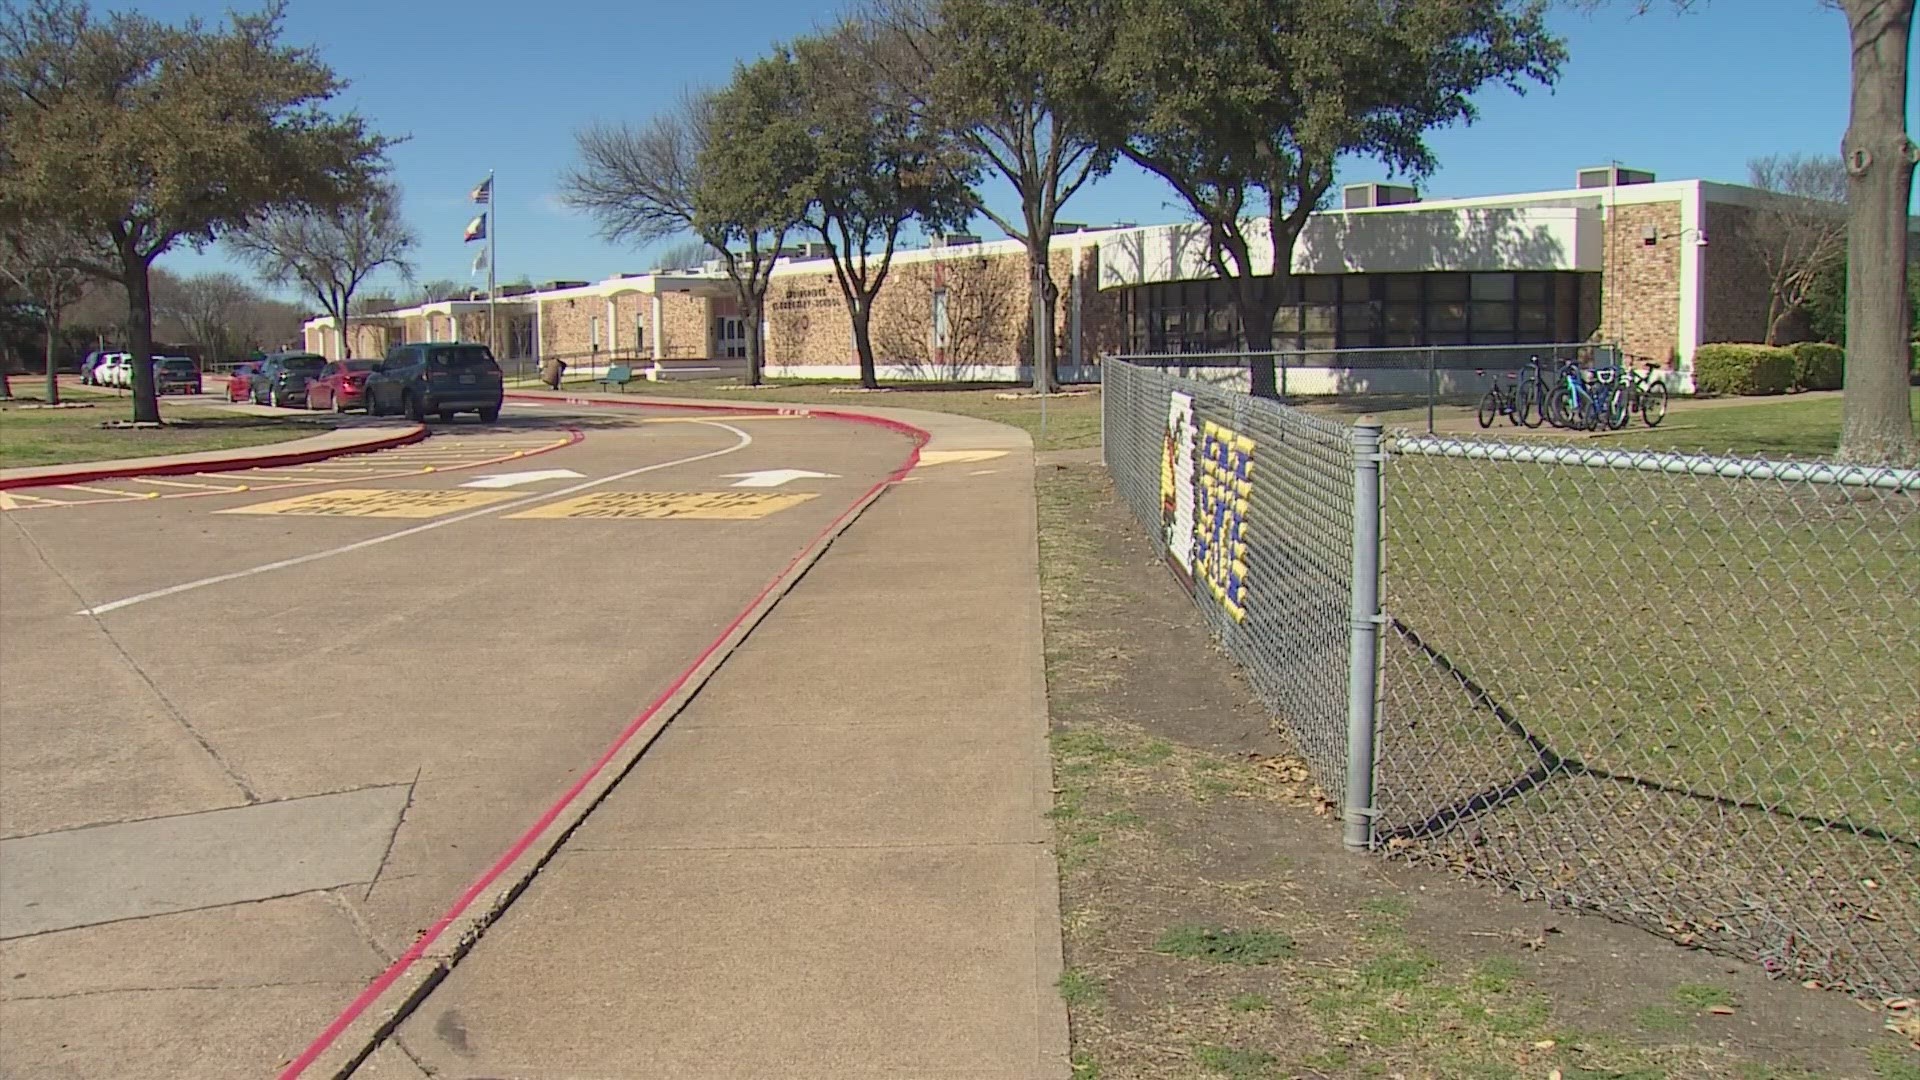 Budget challenges are forcing Richardson ISD to consider consolidating and repurposing multiple elementary schools.